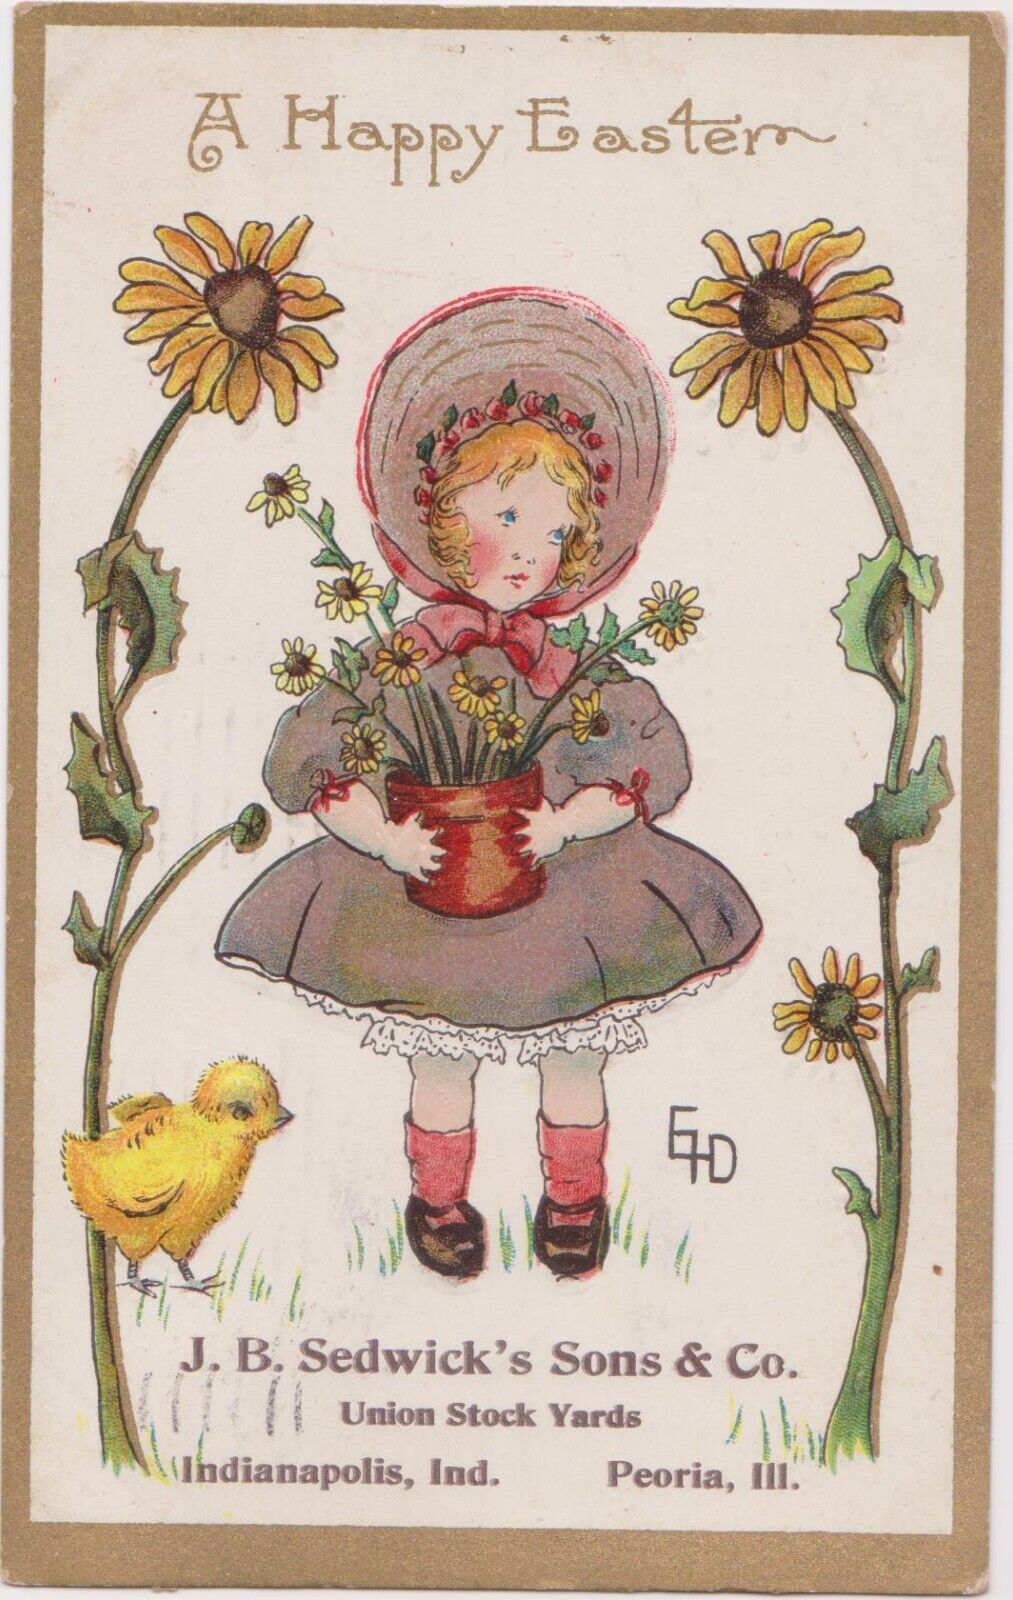 C. 1911 AMP CO Happy Easter Child Daisies Chick Advertisement J B Sedwick's Sons